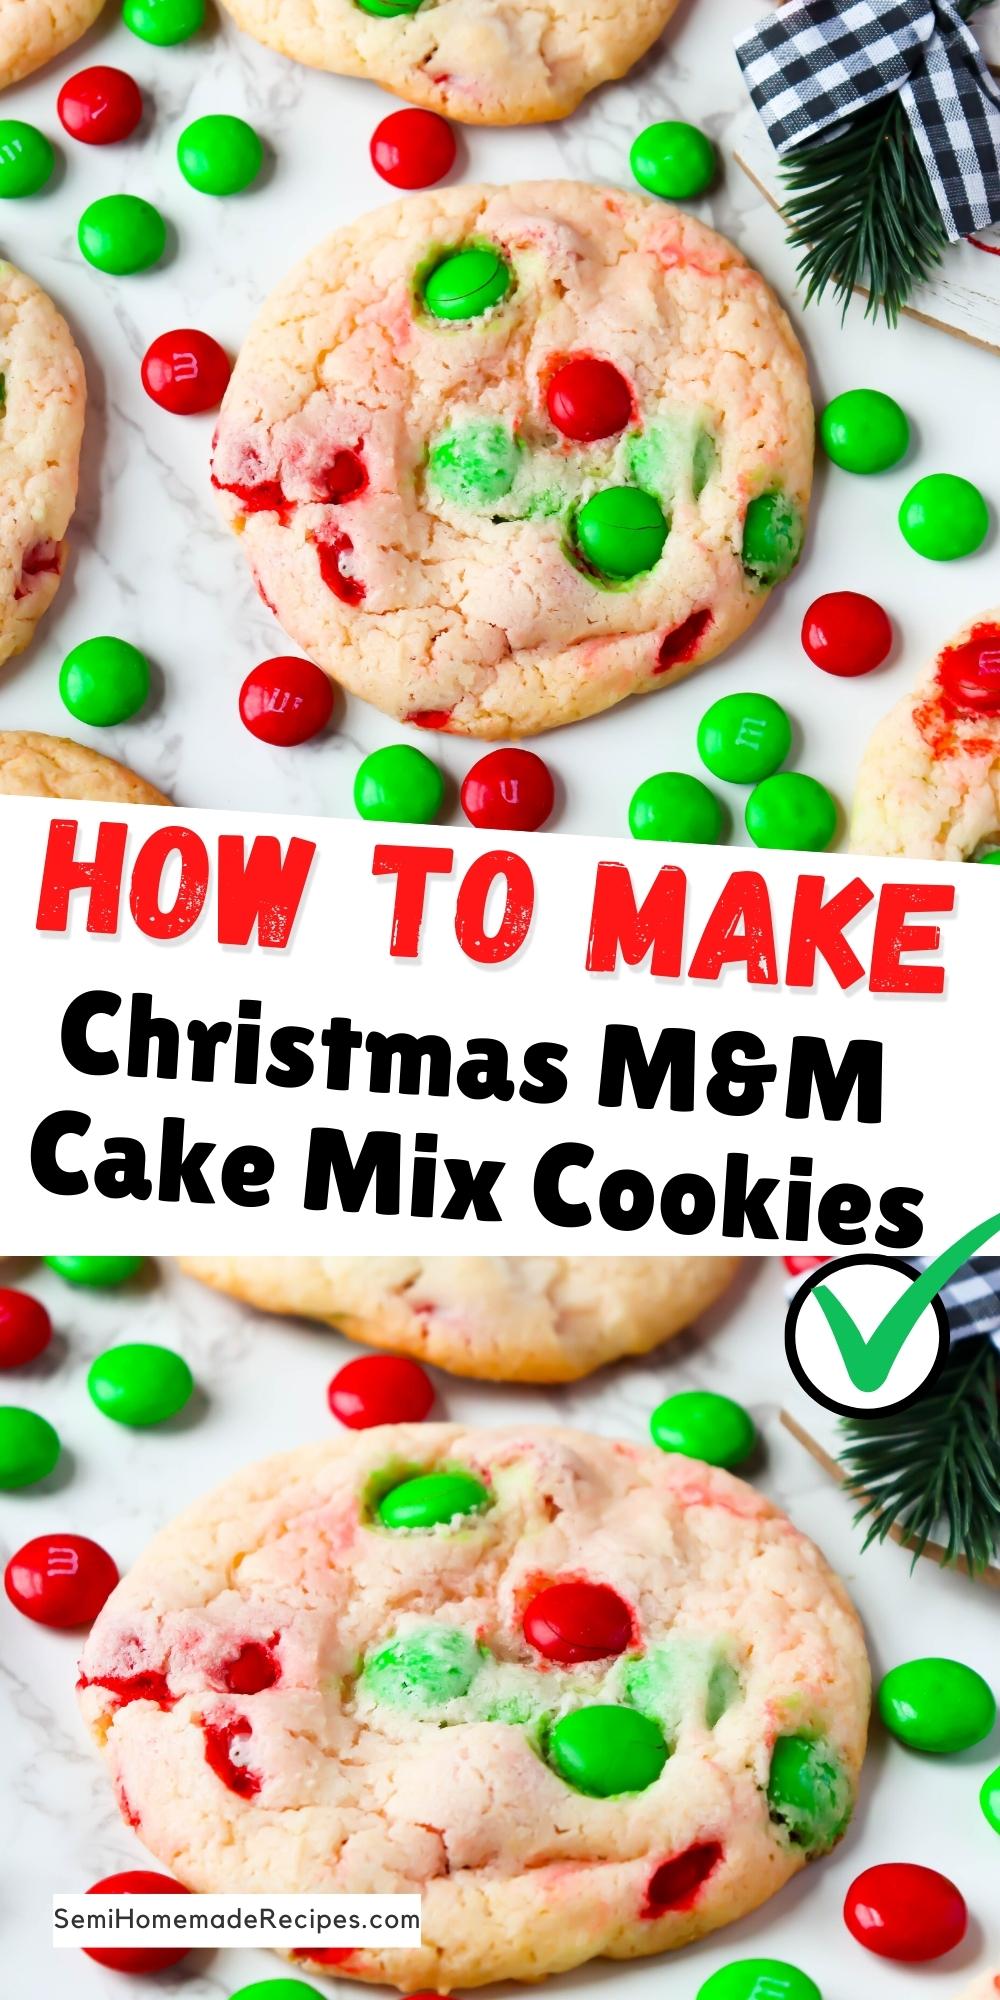 Ready for the perfect Christmas Cookies? These Christmas M&M Cake Mix Cookies are going to be a new favorite! You'll only need 4 ingredients for these cookies!